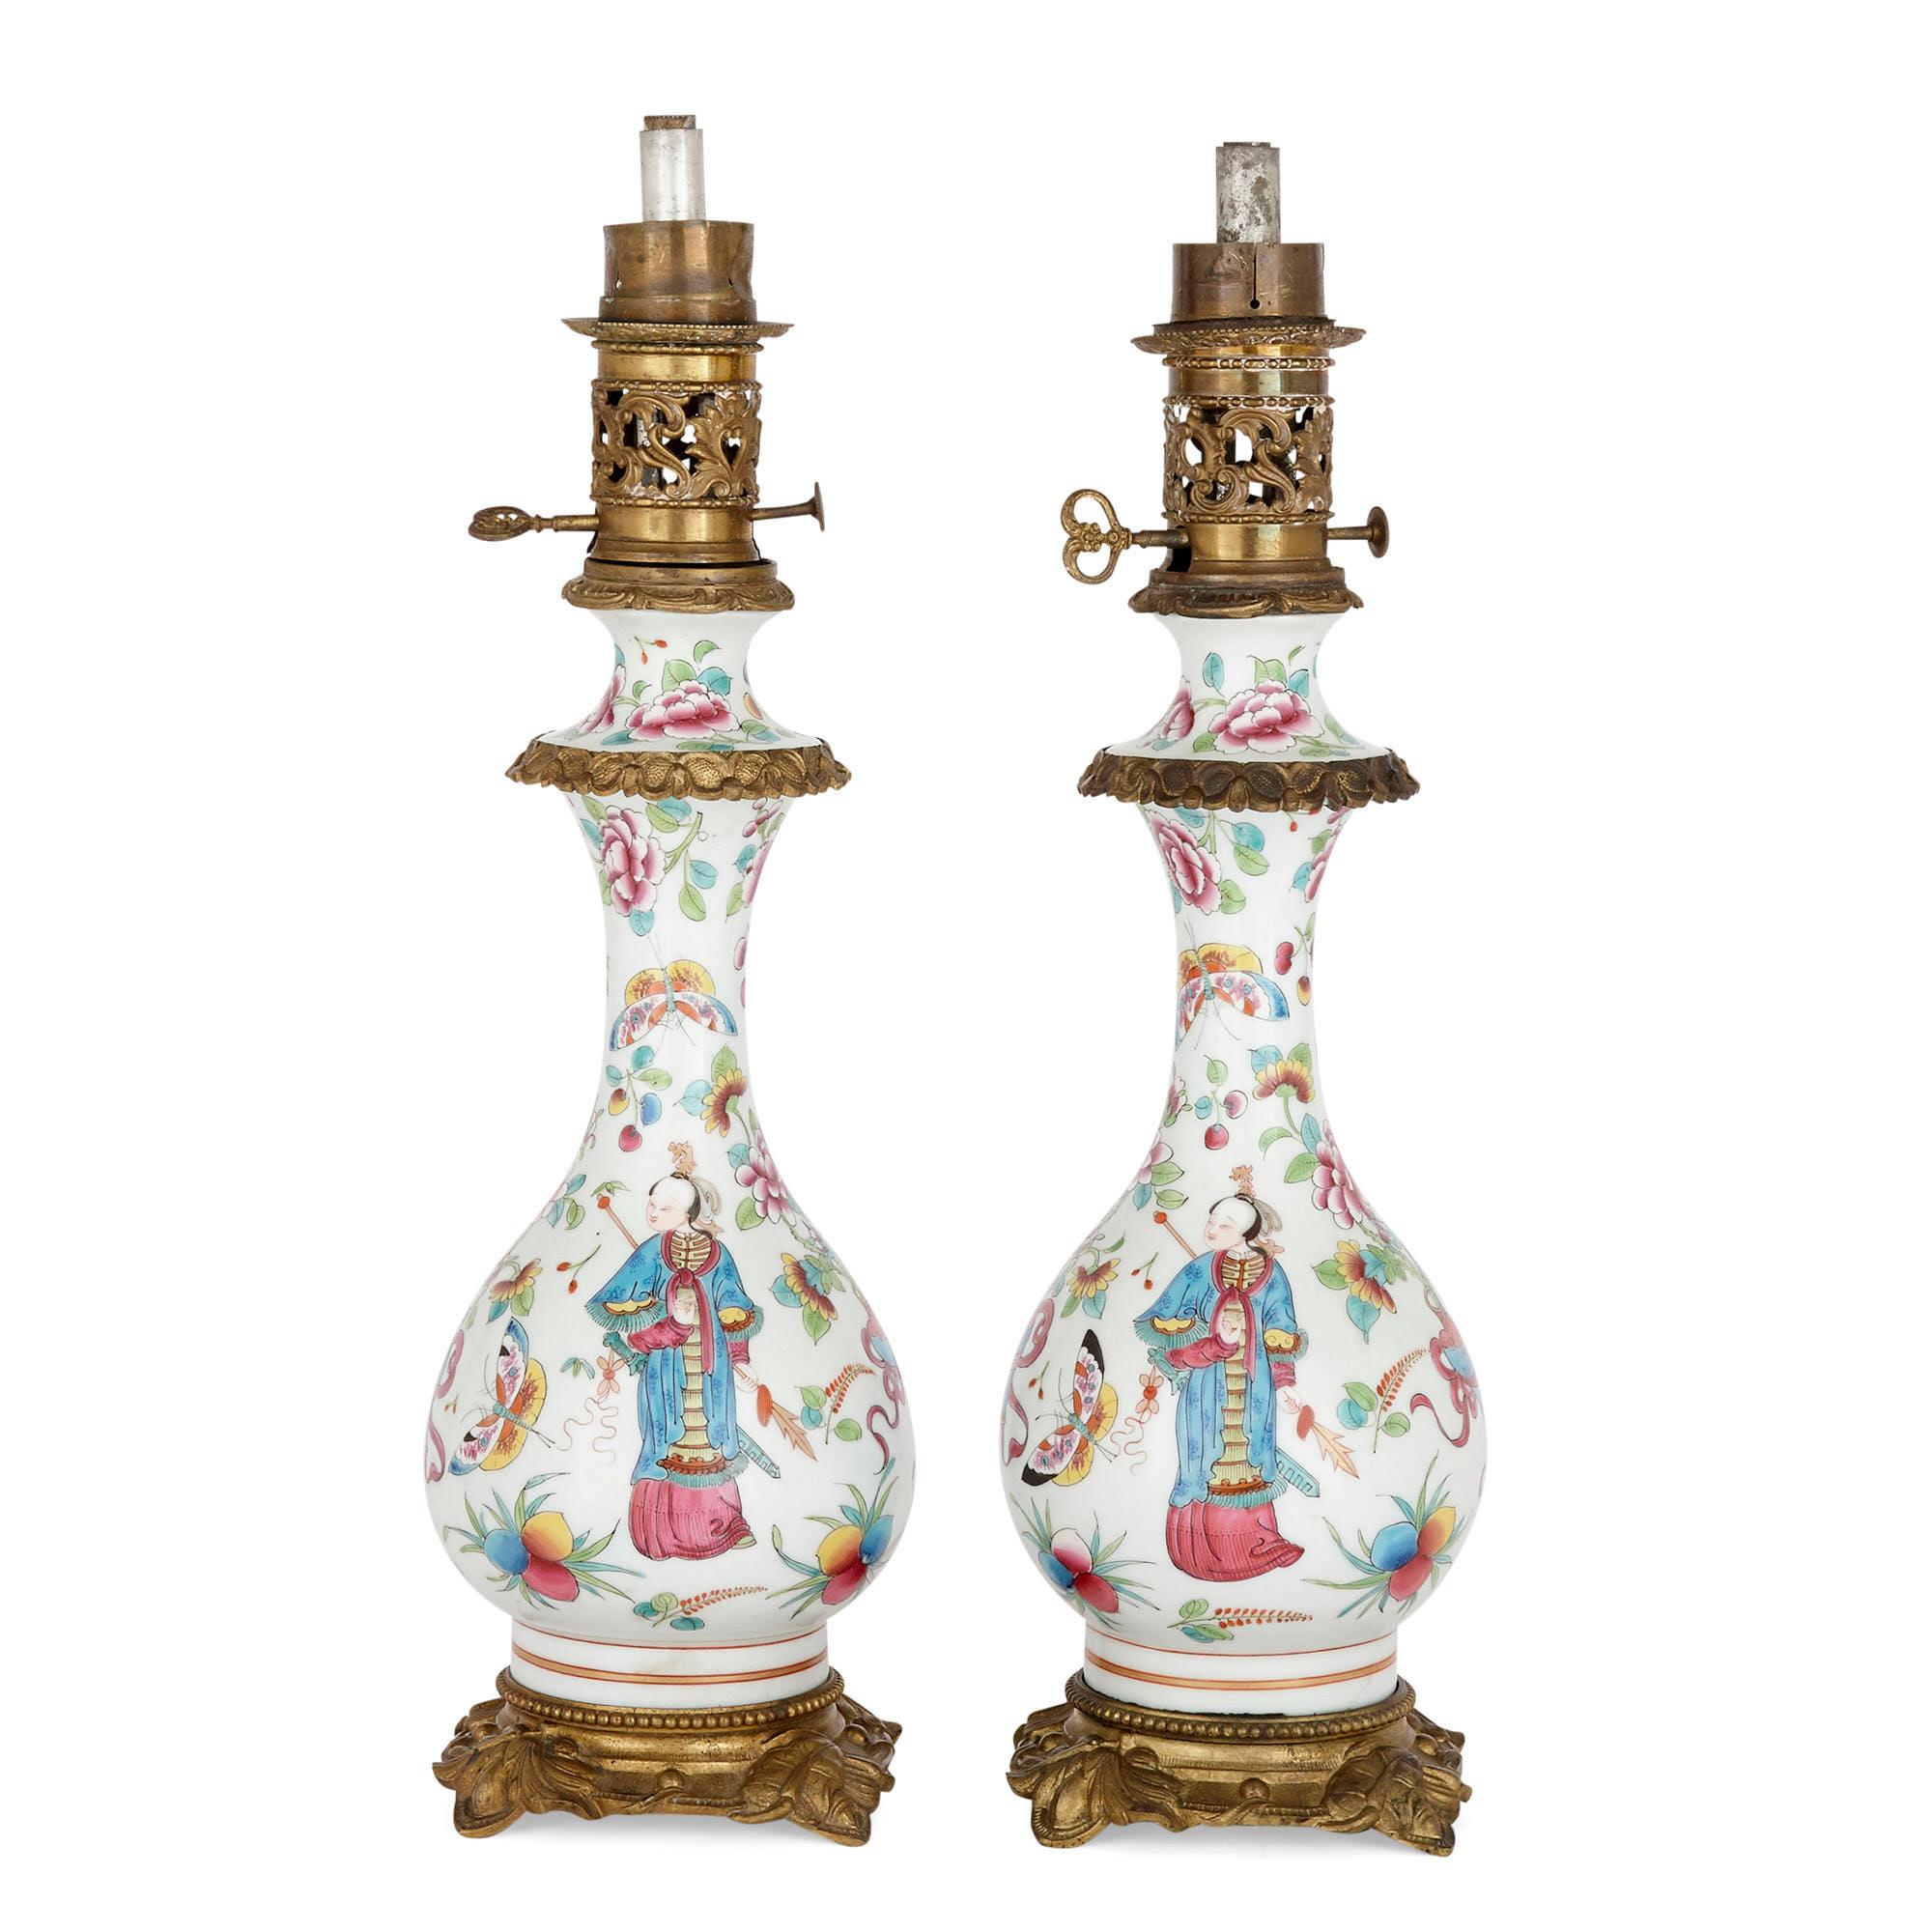 Each oil lamp in this pair is wrought from gilt bronze and Bayeux porcelain and is designed in the chinoiserie style so prominent in French art during the latter 19th century. Each lamp stands on a gilt bronze base, raised by four foliate feet, and